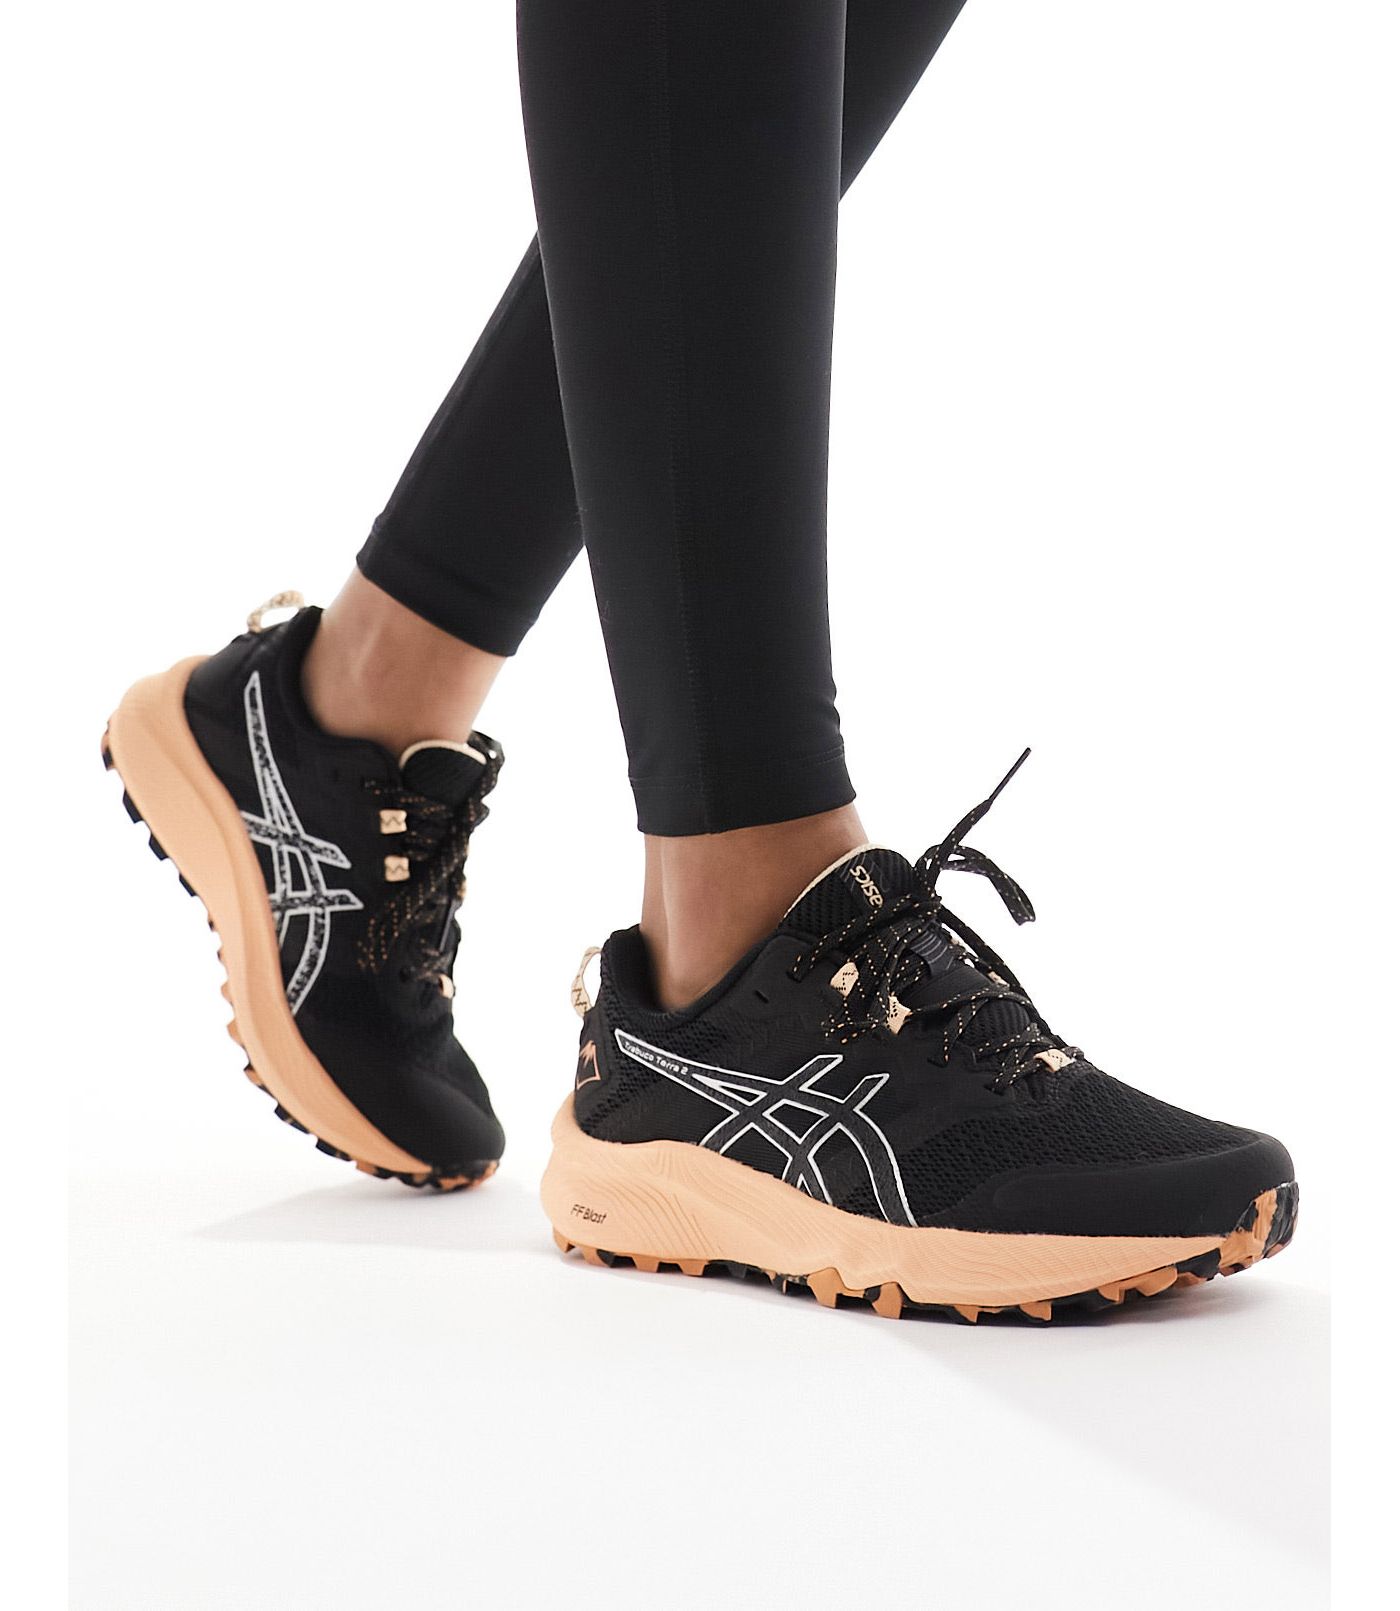 Asics Trabuco Terra 2 trail running chunky sole trainers in black and peach